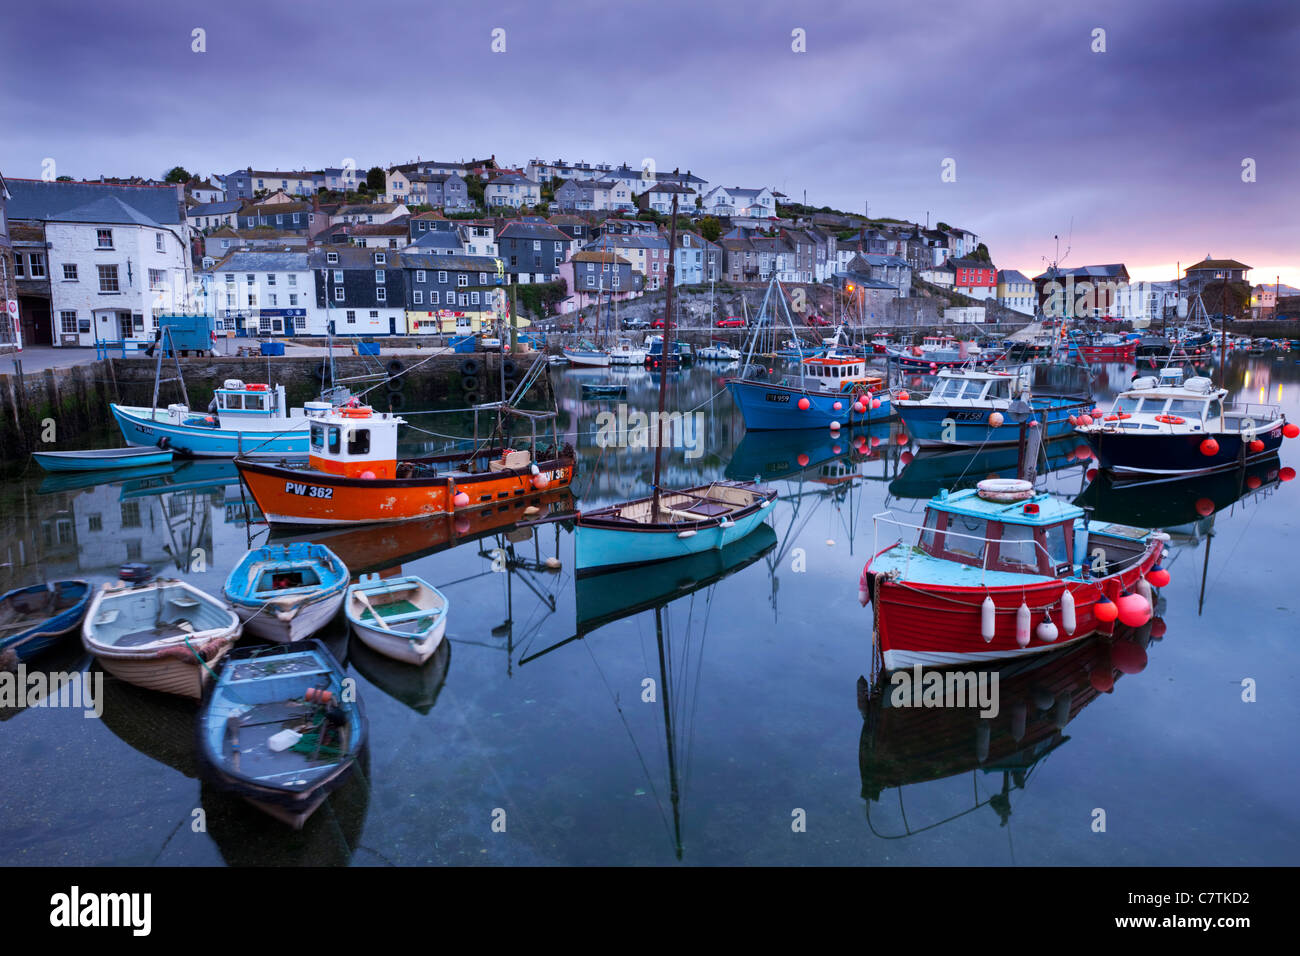 Sunrise over the picturesque harbour at Mevagissey, Cornwall, England. Spring (May) 2011. Stock Photo